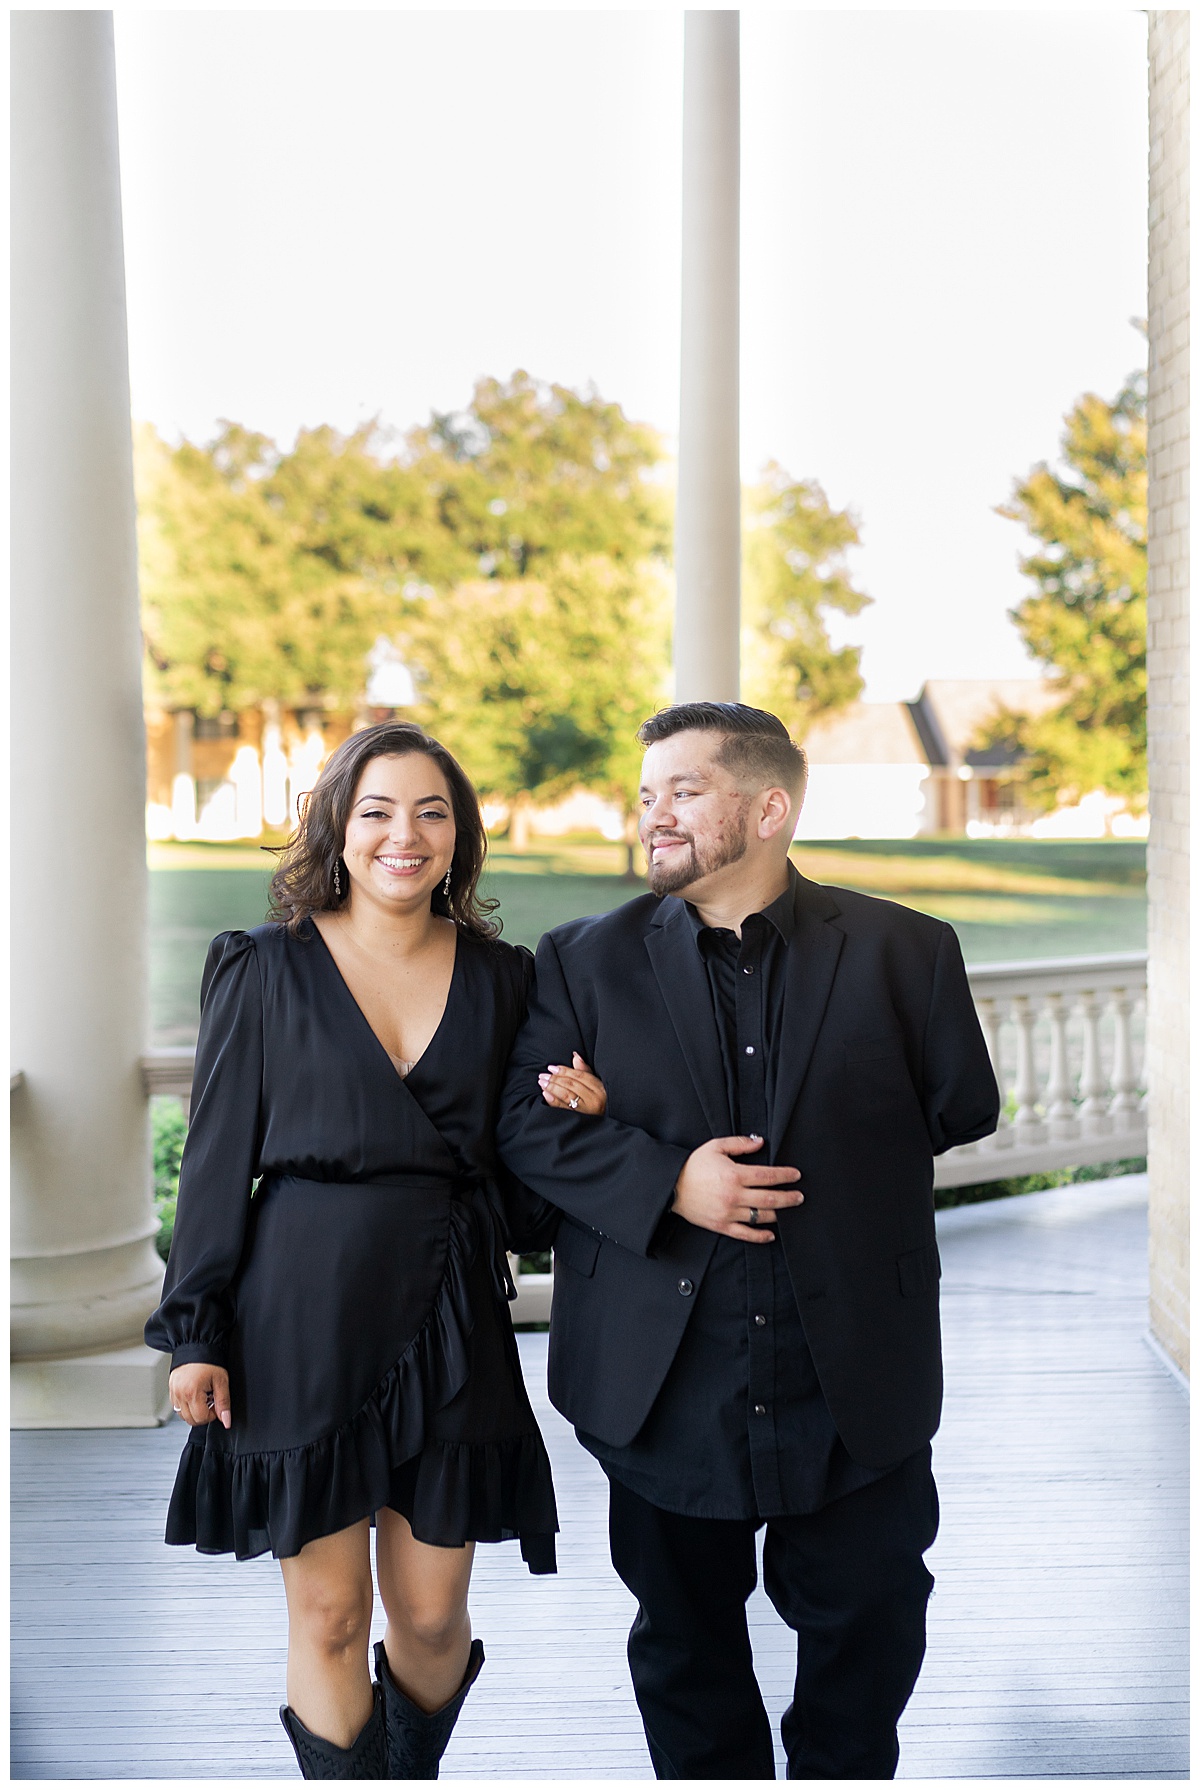 Man and woman smile together for Houston’s Best Wedding Photographers